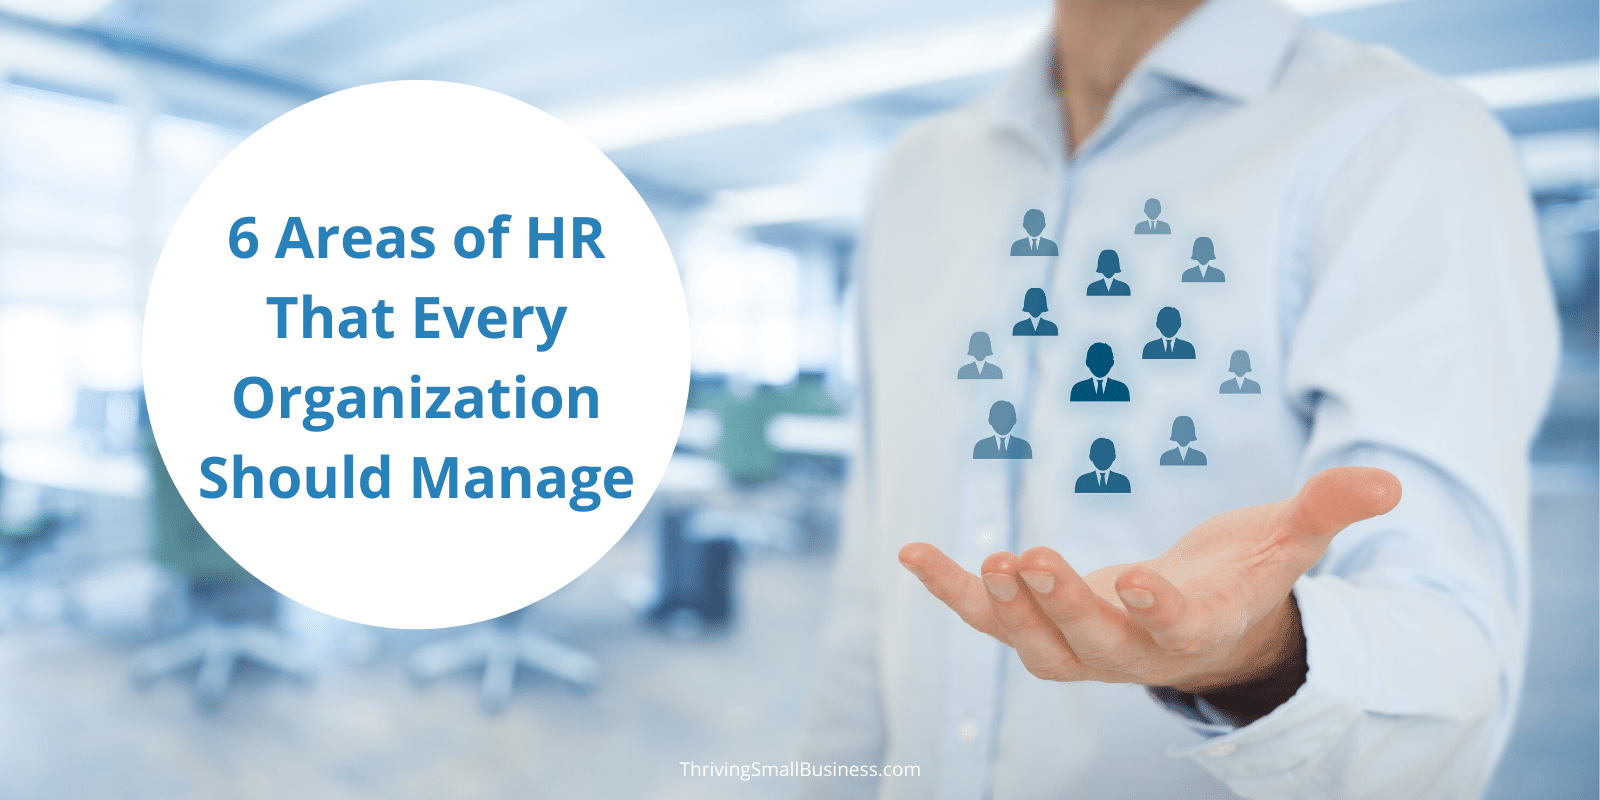 6 Areas Of Hr That Every Organization Should Manage The Thriving Small Business